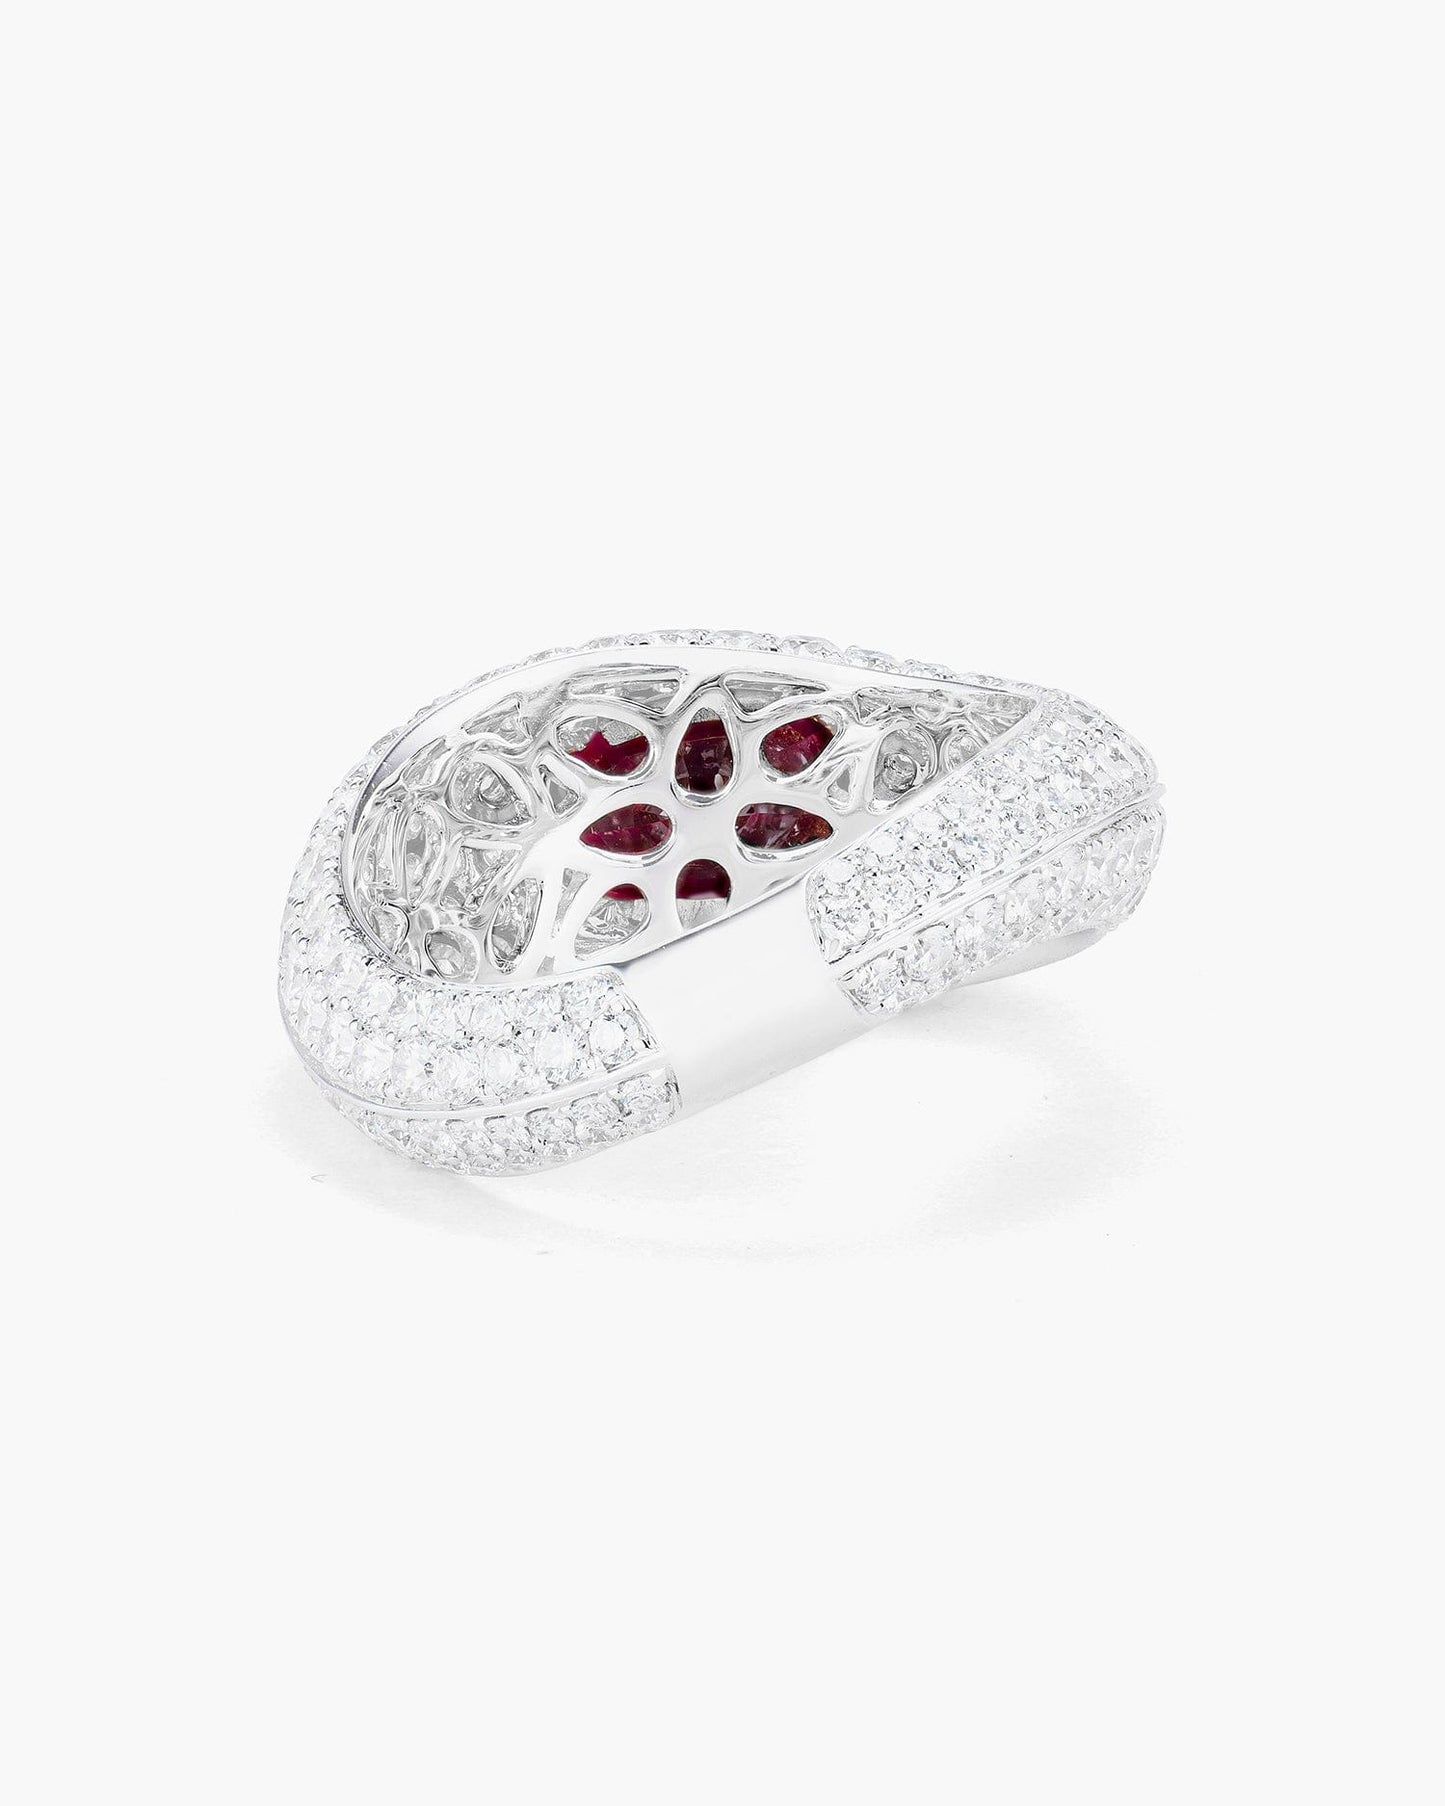 2.52 carat Oval Shape Mozambique Ruby and Diamond Ring